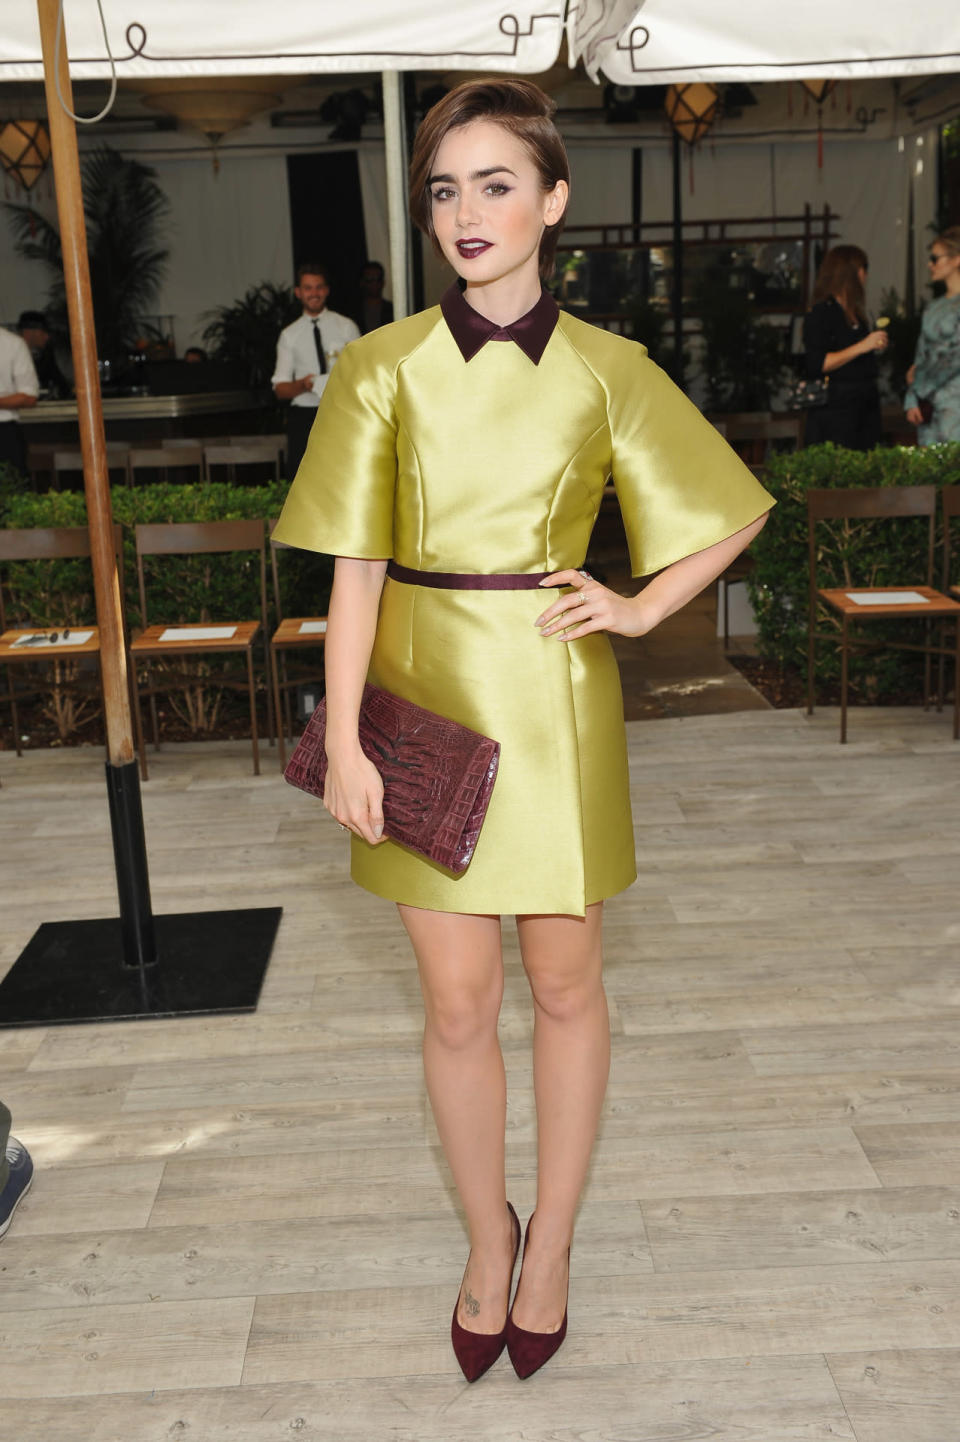 Lily Collins wears a chartreuse satin dress with oxblood accents at the CFDA/Vogue Fashion Fund Show.